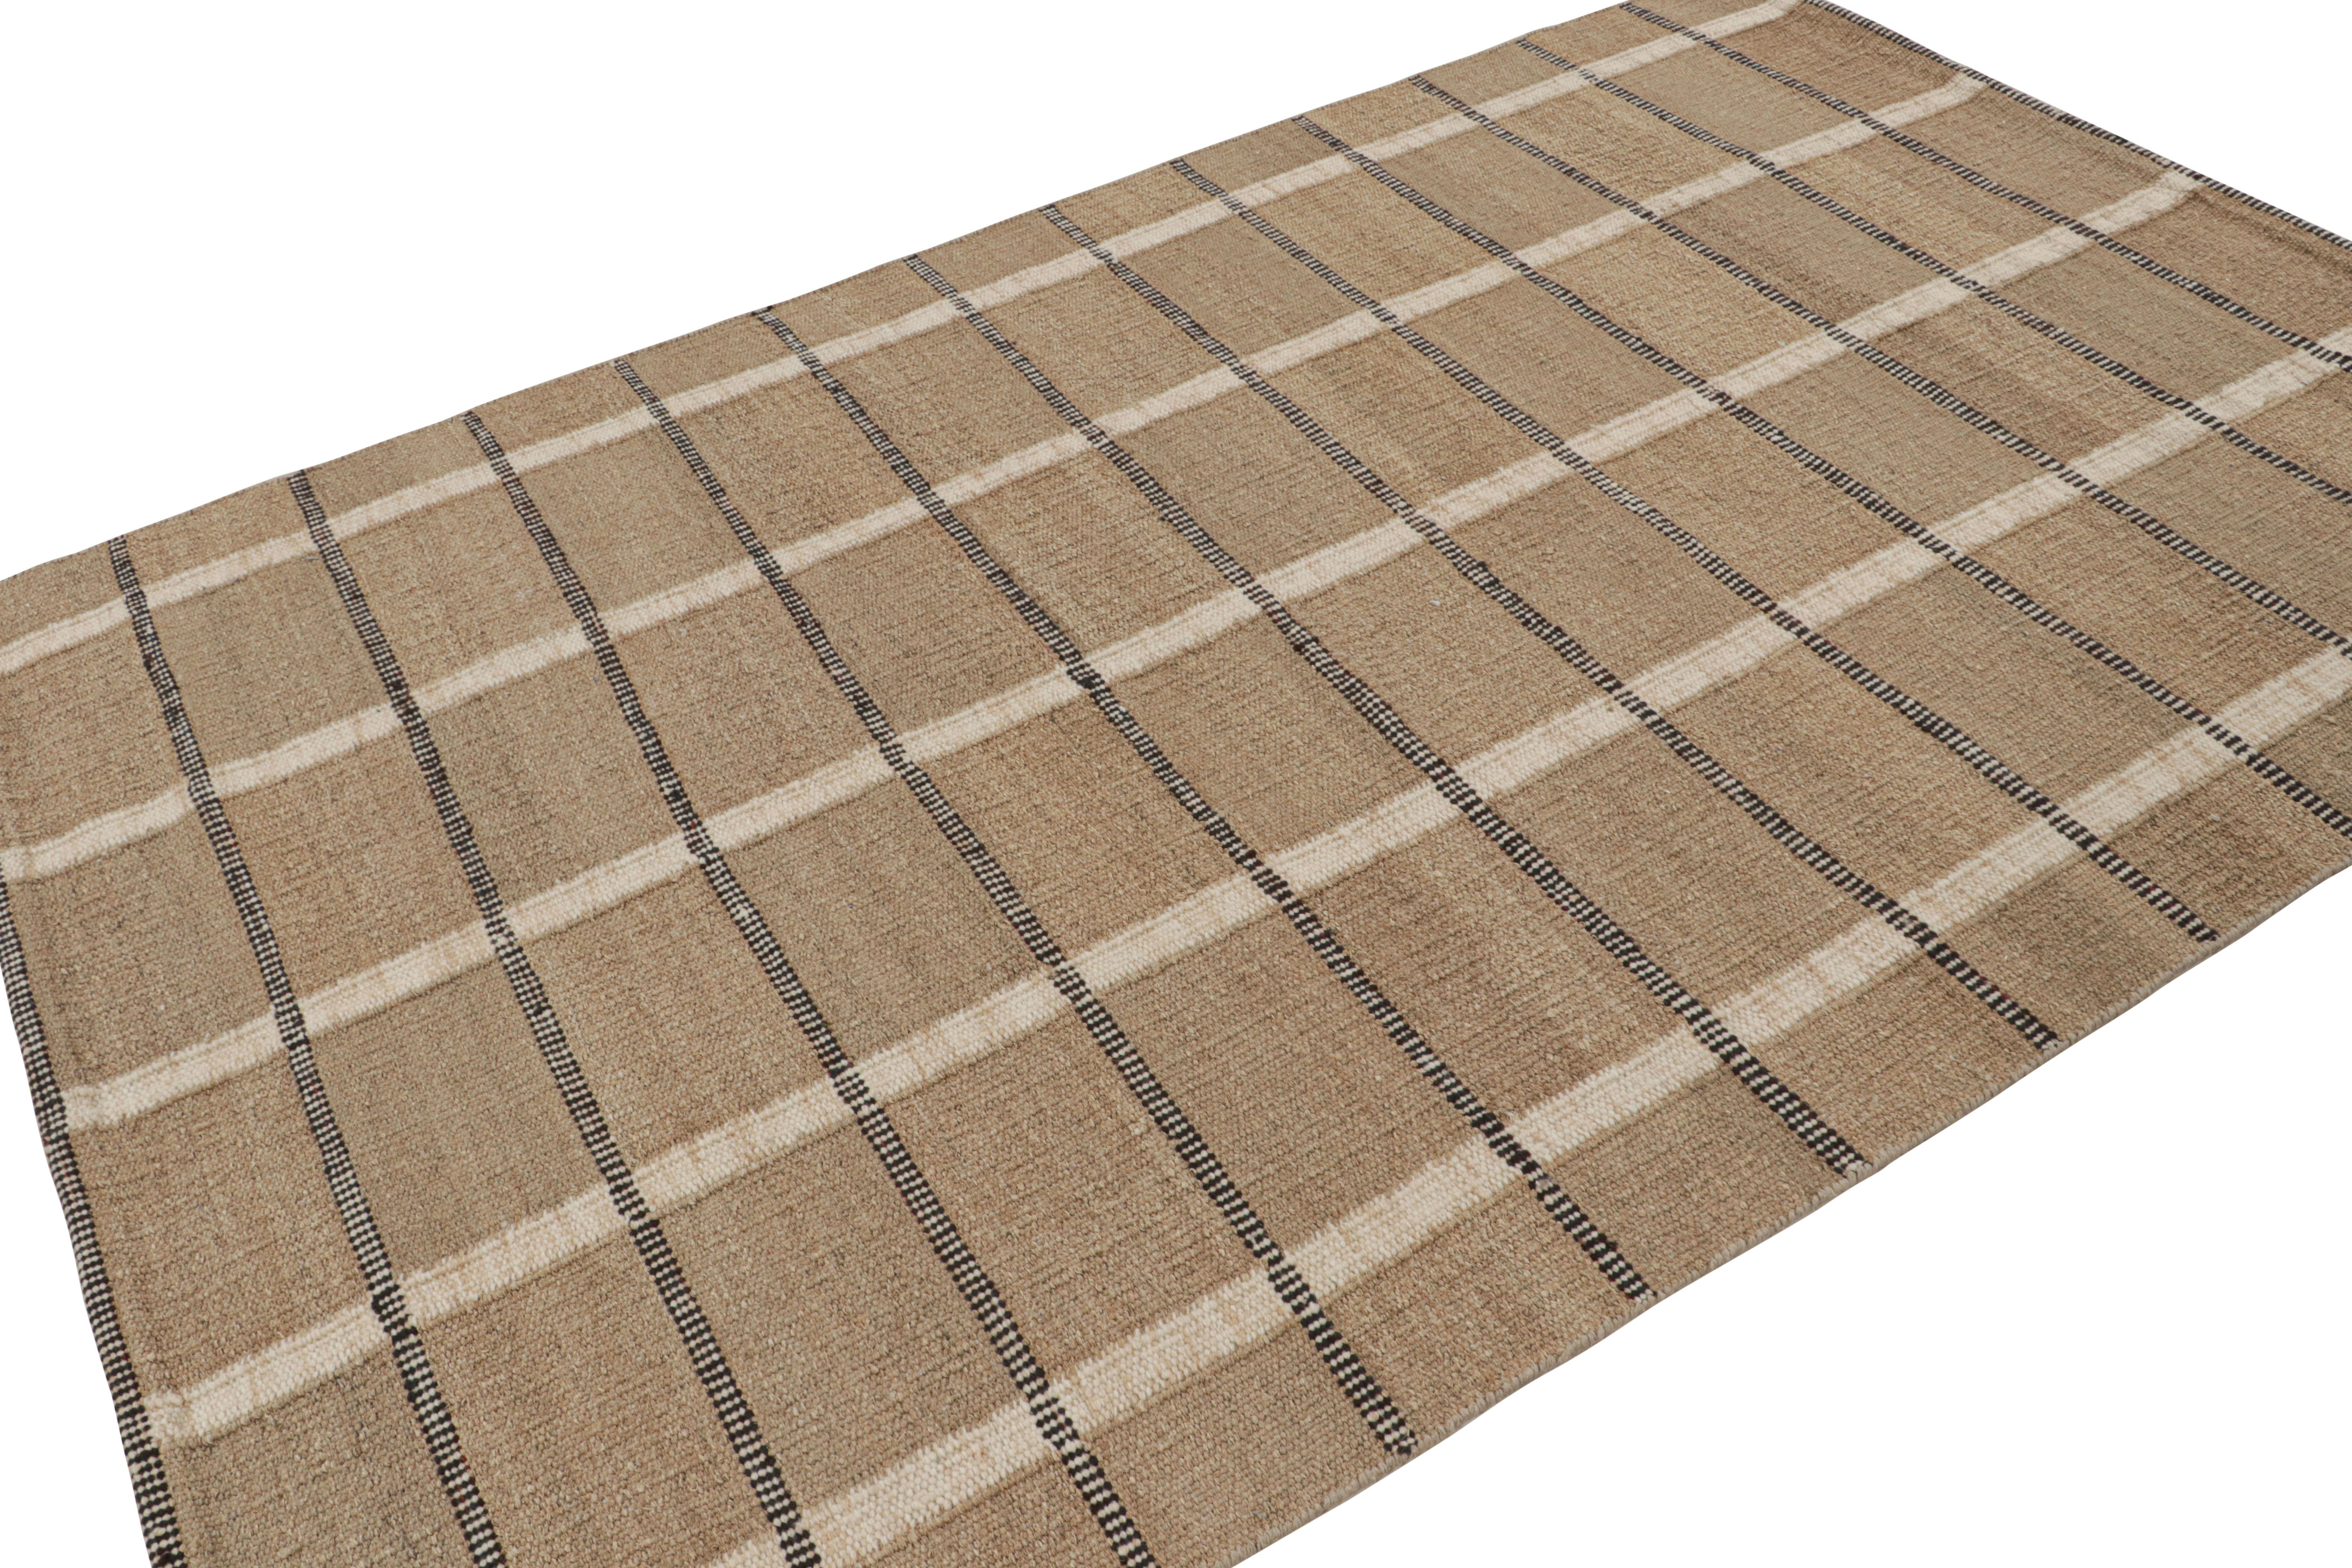 Handwoven in hemp, this 6x9 sustainable flatweave represents the “Natural” line of Rug & Kilim’s Scandinavian rug collection.

On the Design:

The design enjoys a field of beige-brown tones underscoring stripes in white and black, forming an all